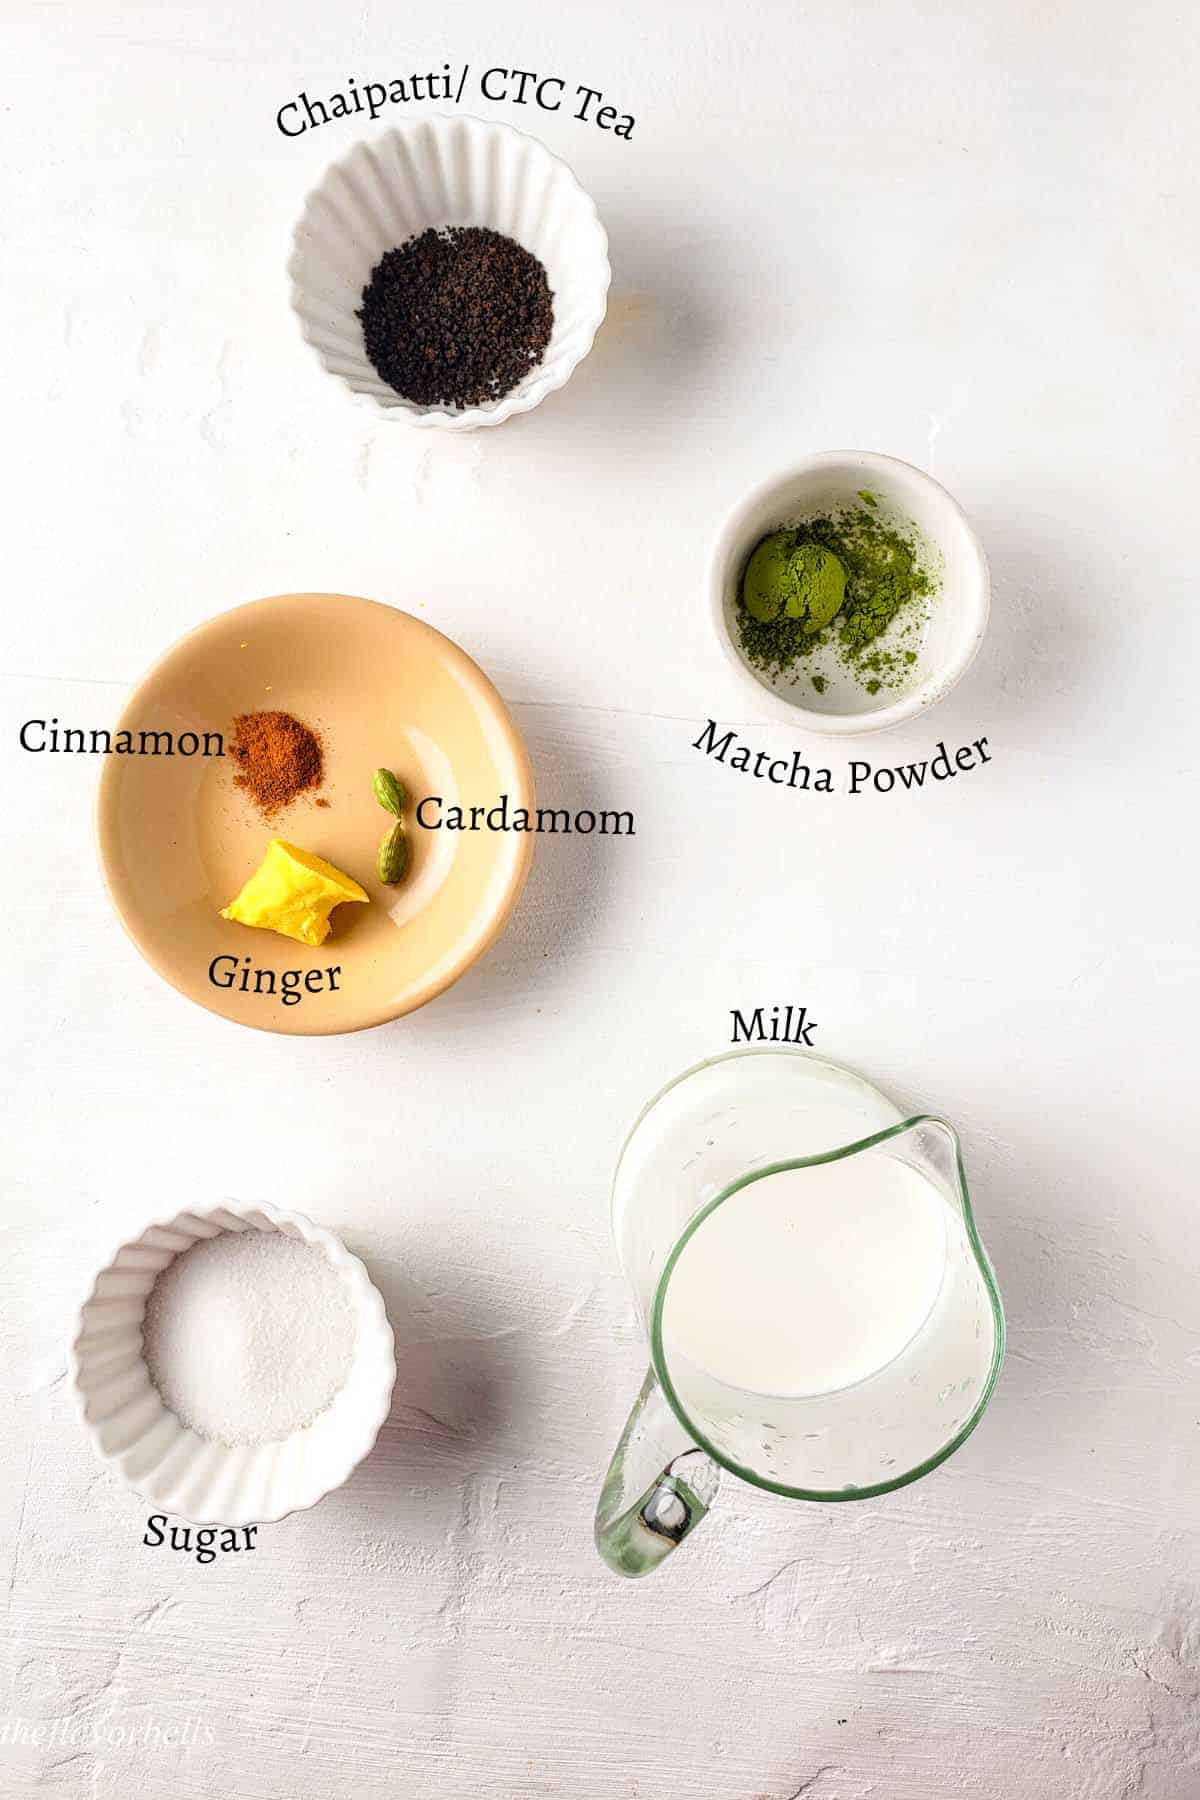 image showing all the ingredients used in making this latte